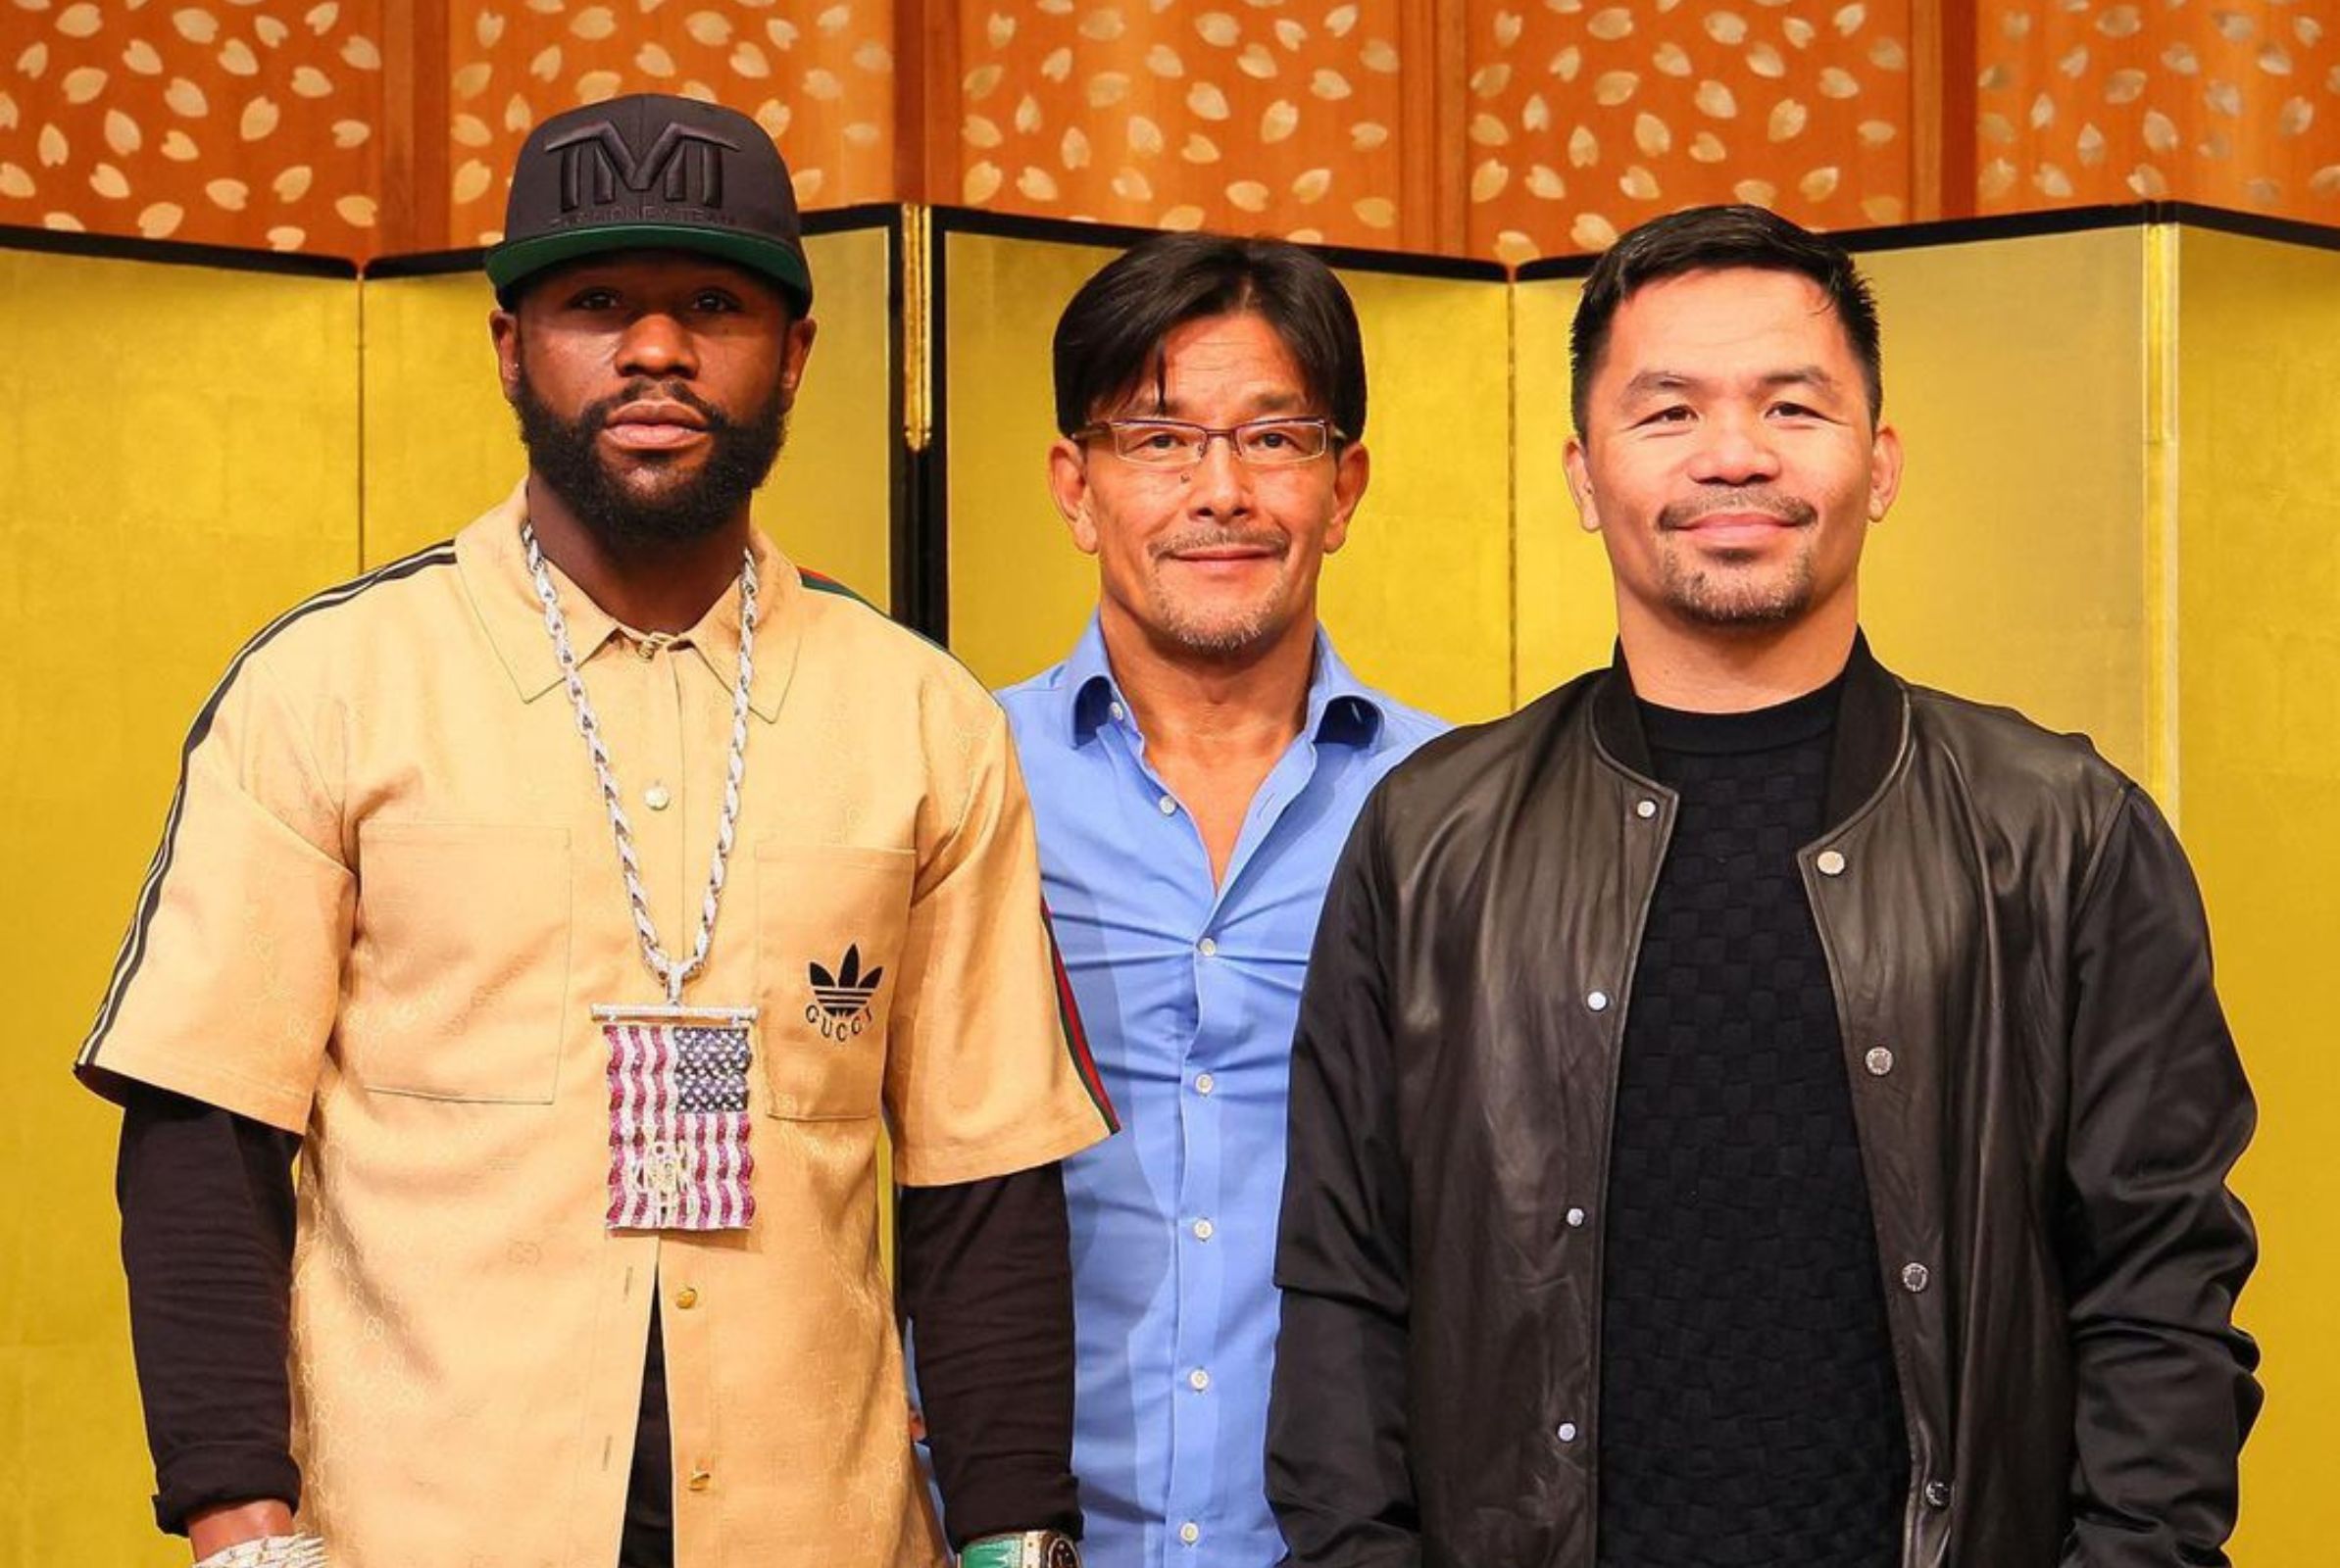 Manny Pacquiao and Floyd Mayweather shared the spotlight at a 2022 press conference in Japan